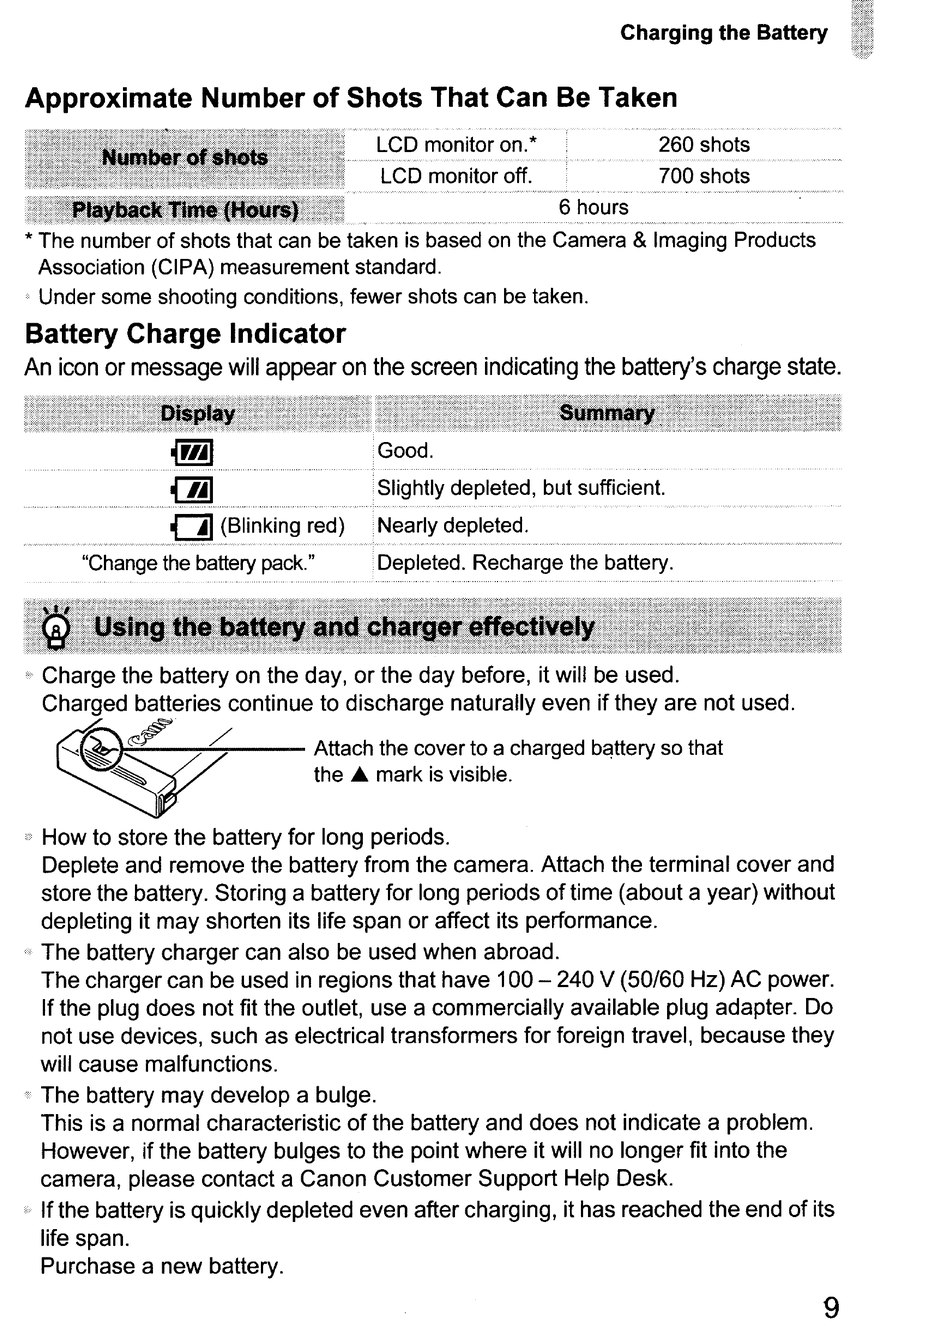 Charging The Battery - Canon PowerShot SD1200 IS Getting Started [Page 9] |  ManualsLib